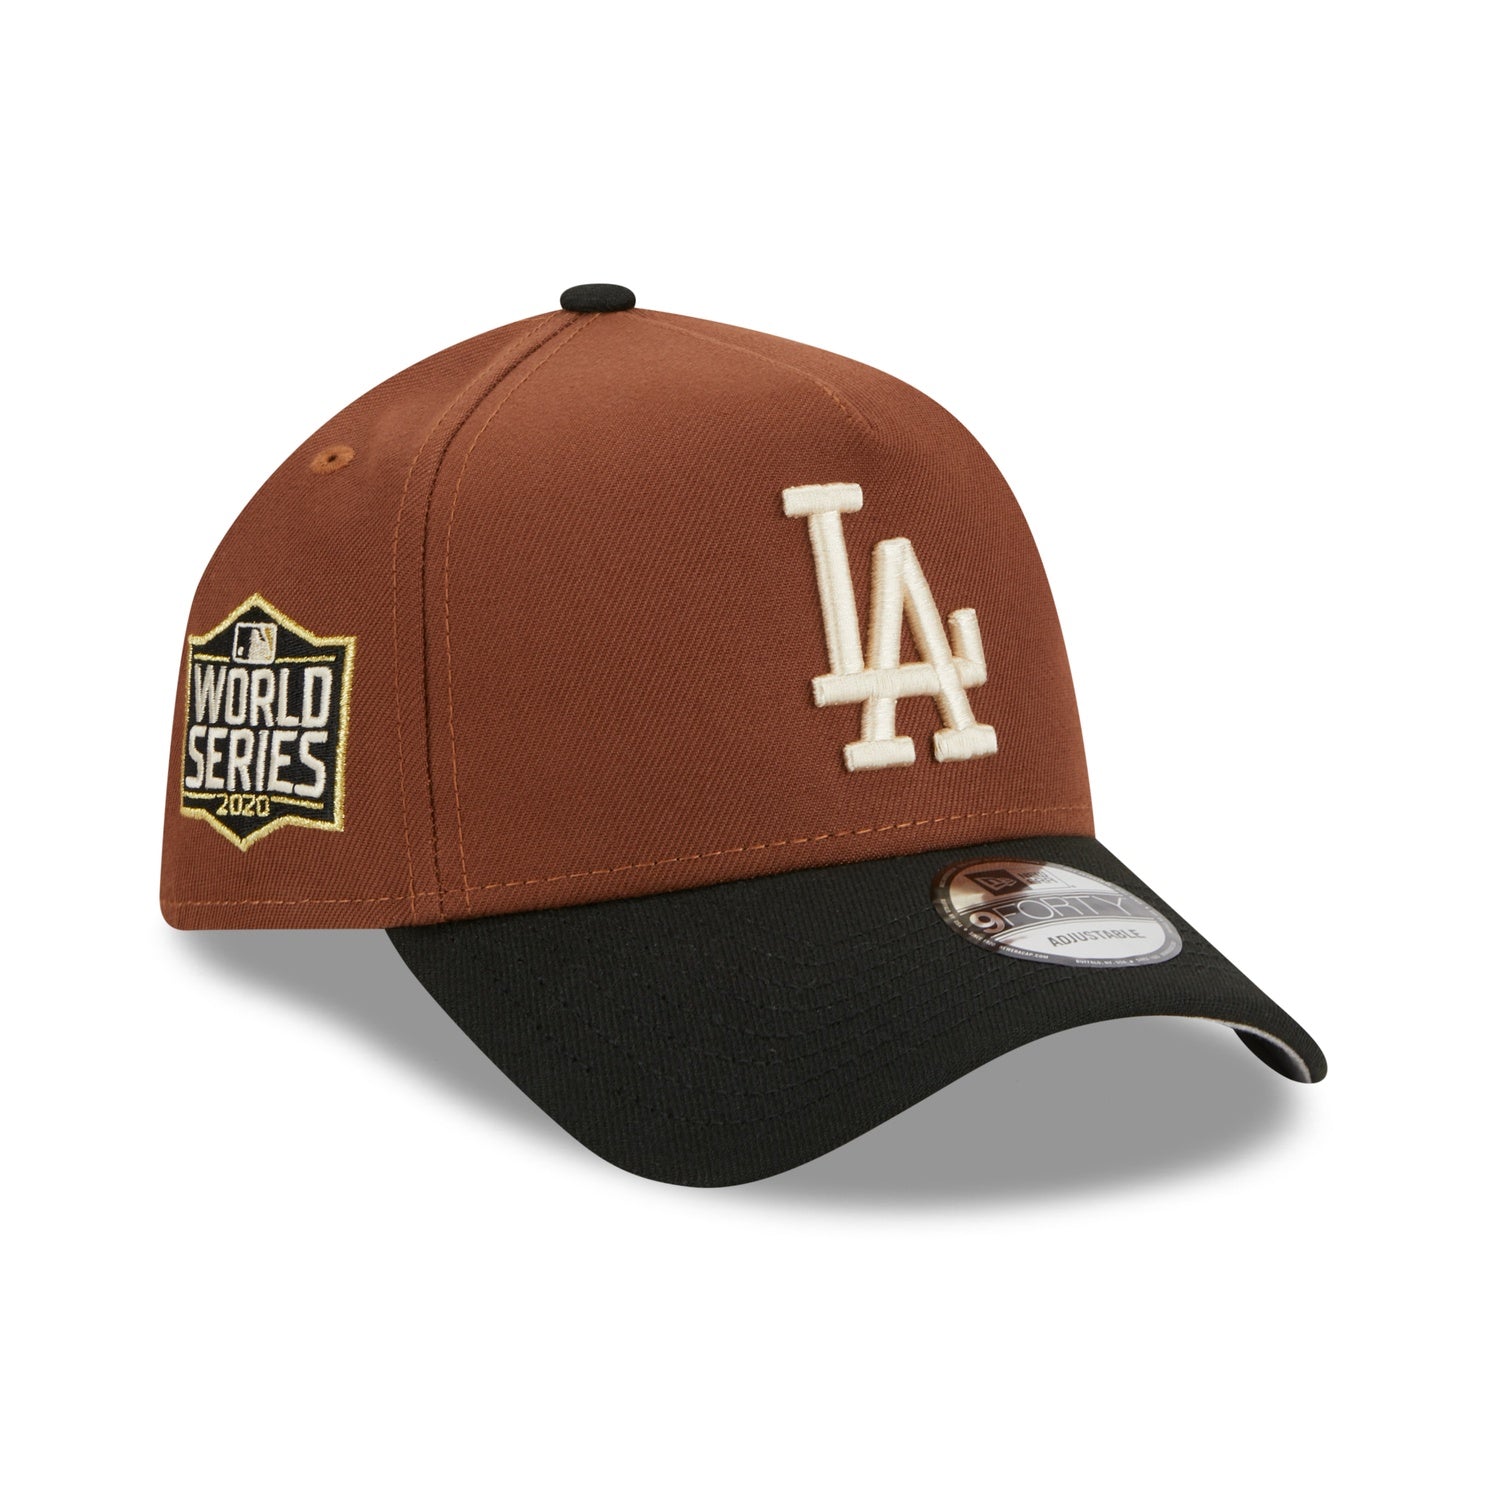 NEW ERA 9FORTY A-FRAME LOS ANGELES DODGERS WORLD SERIES 2020 TWO